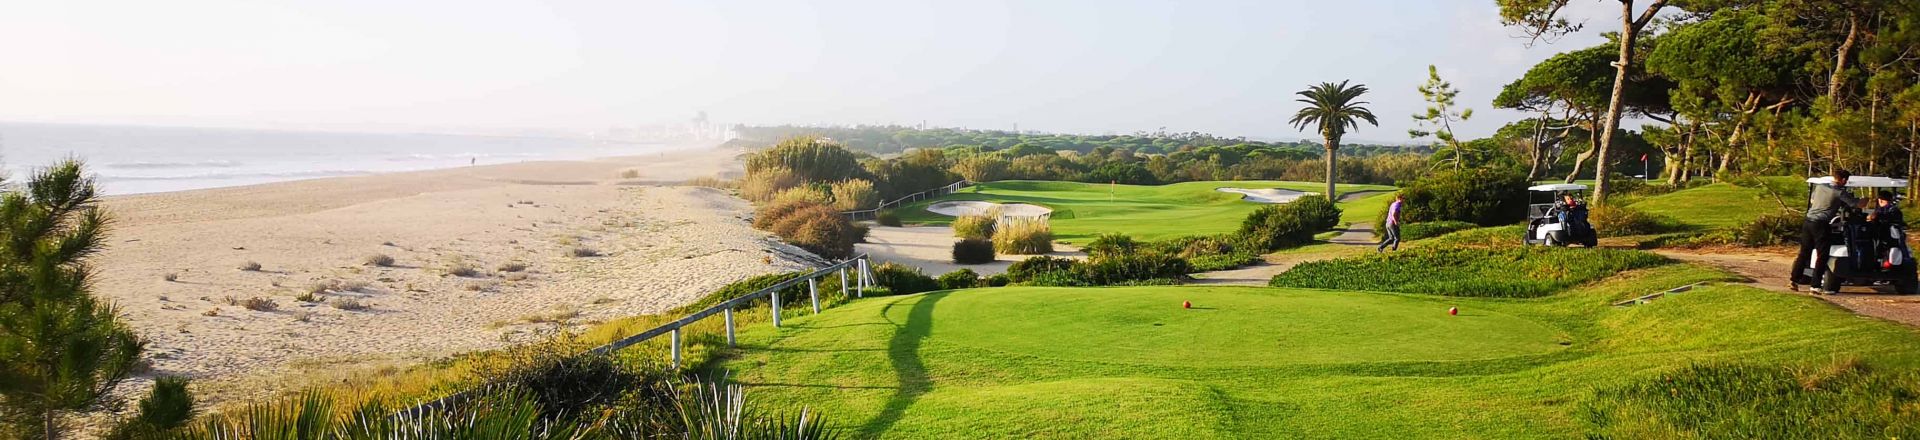 Golf Holidays in Algarve at the Vale Do Lobo Golf Course